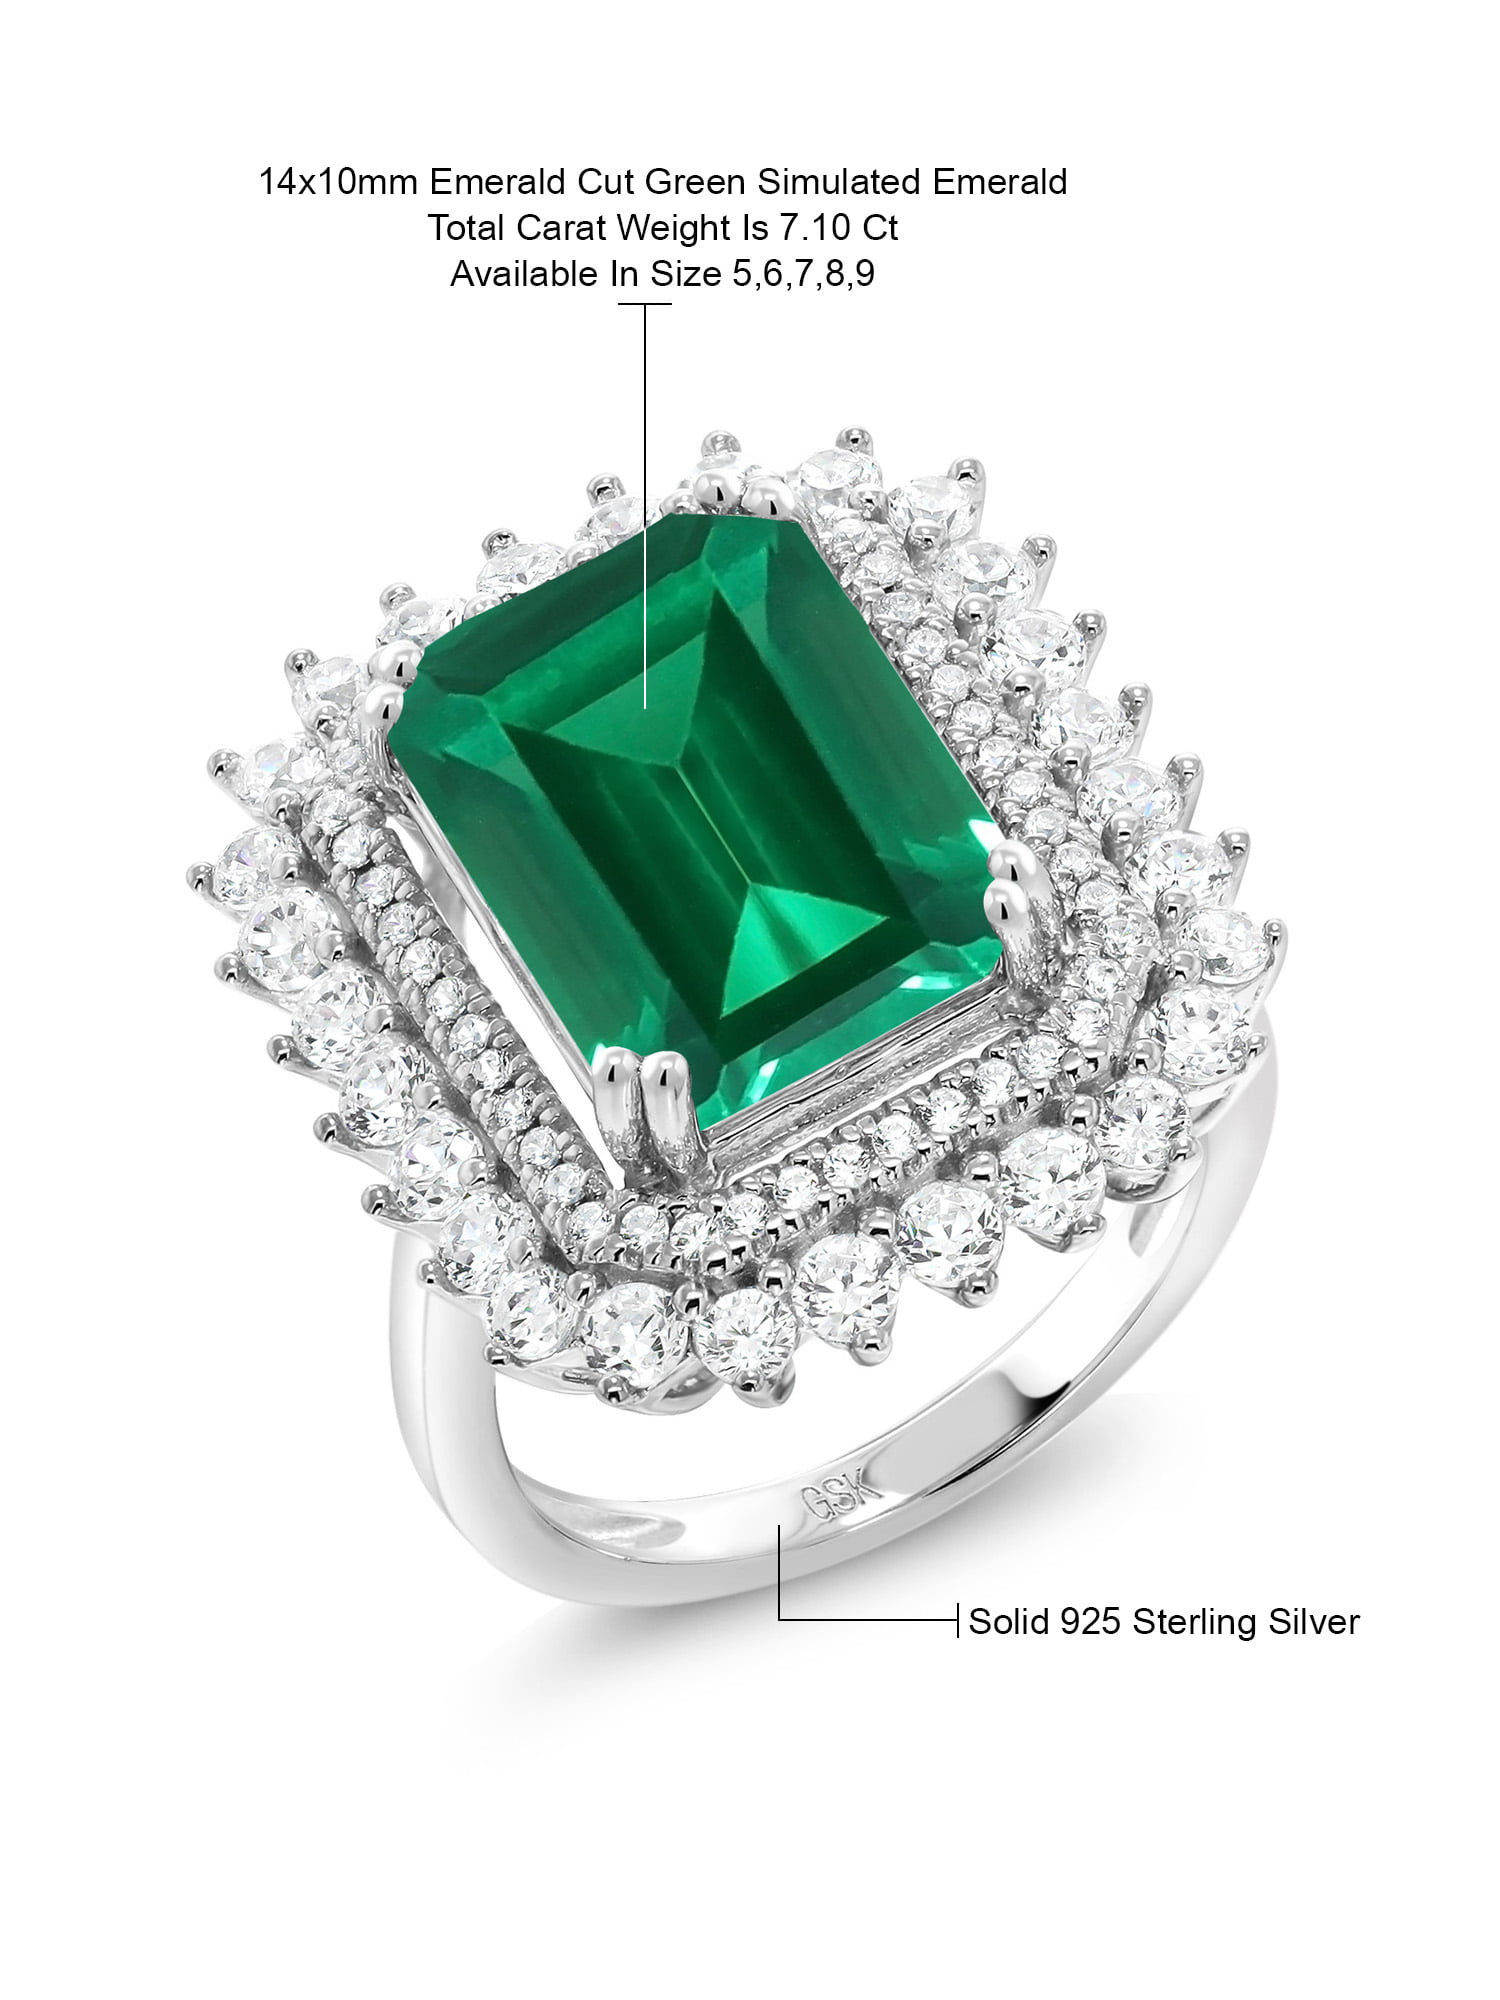 Available 5,6,7,8,9 Gem Stone King 925 Sterling Silver Green Simulated Emerald Womens Ring 7.10 Ct Emerald Cut Available in 